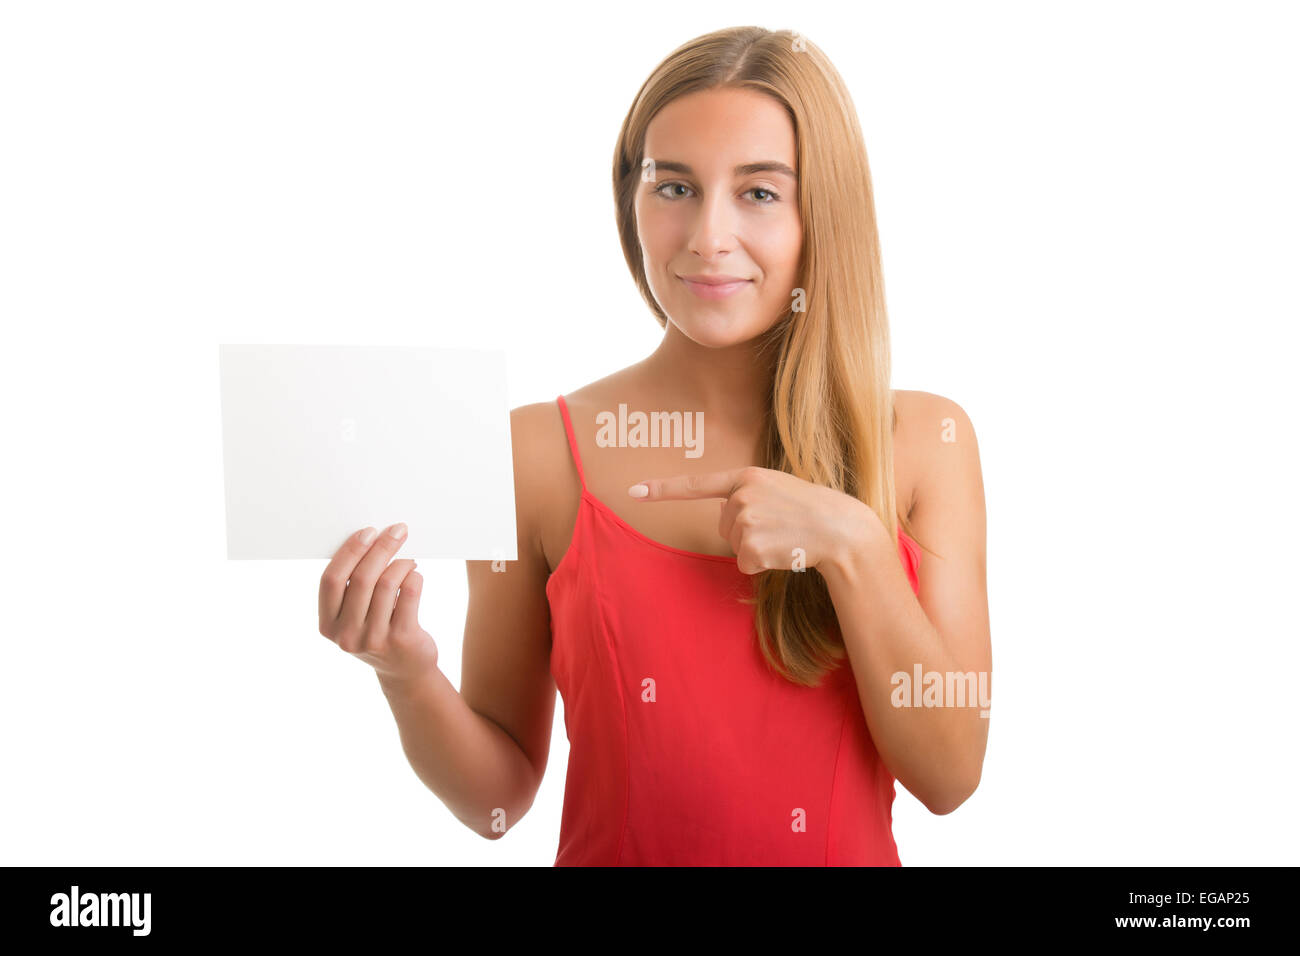 Young happy woman holding a blank business card on a white background Stock Photo